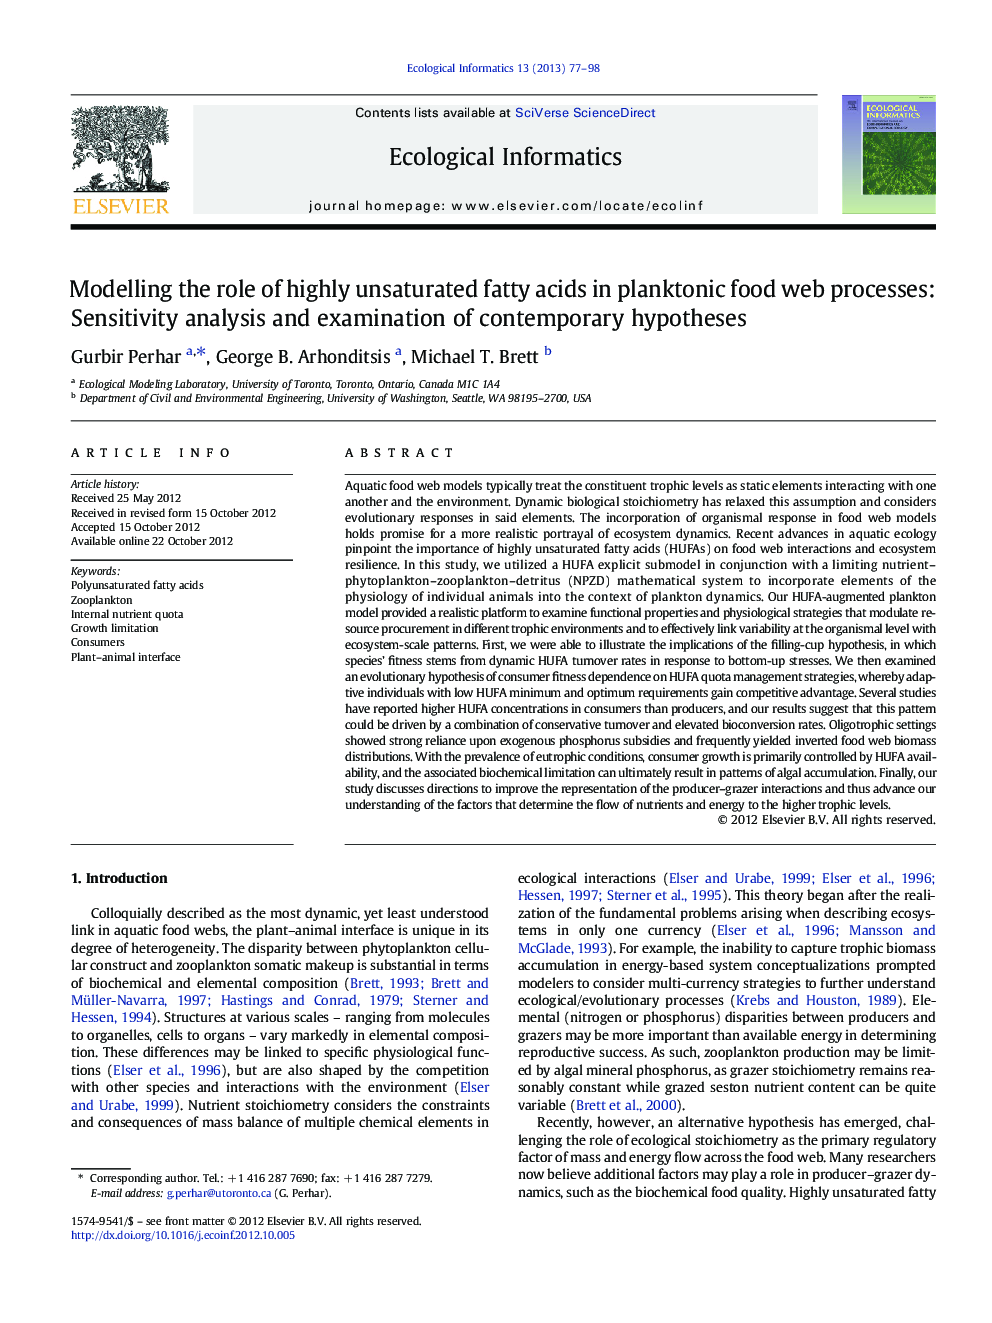 Modelling the role of highly unsaturated fatty acids in planktonic food web processes: Sensitivity analysis and examination of contemporary hypotheses